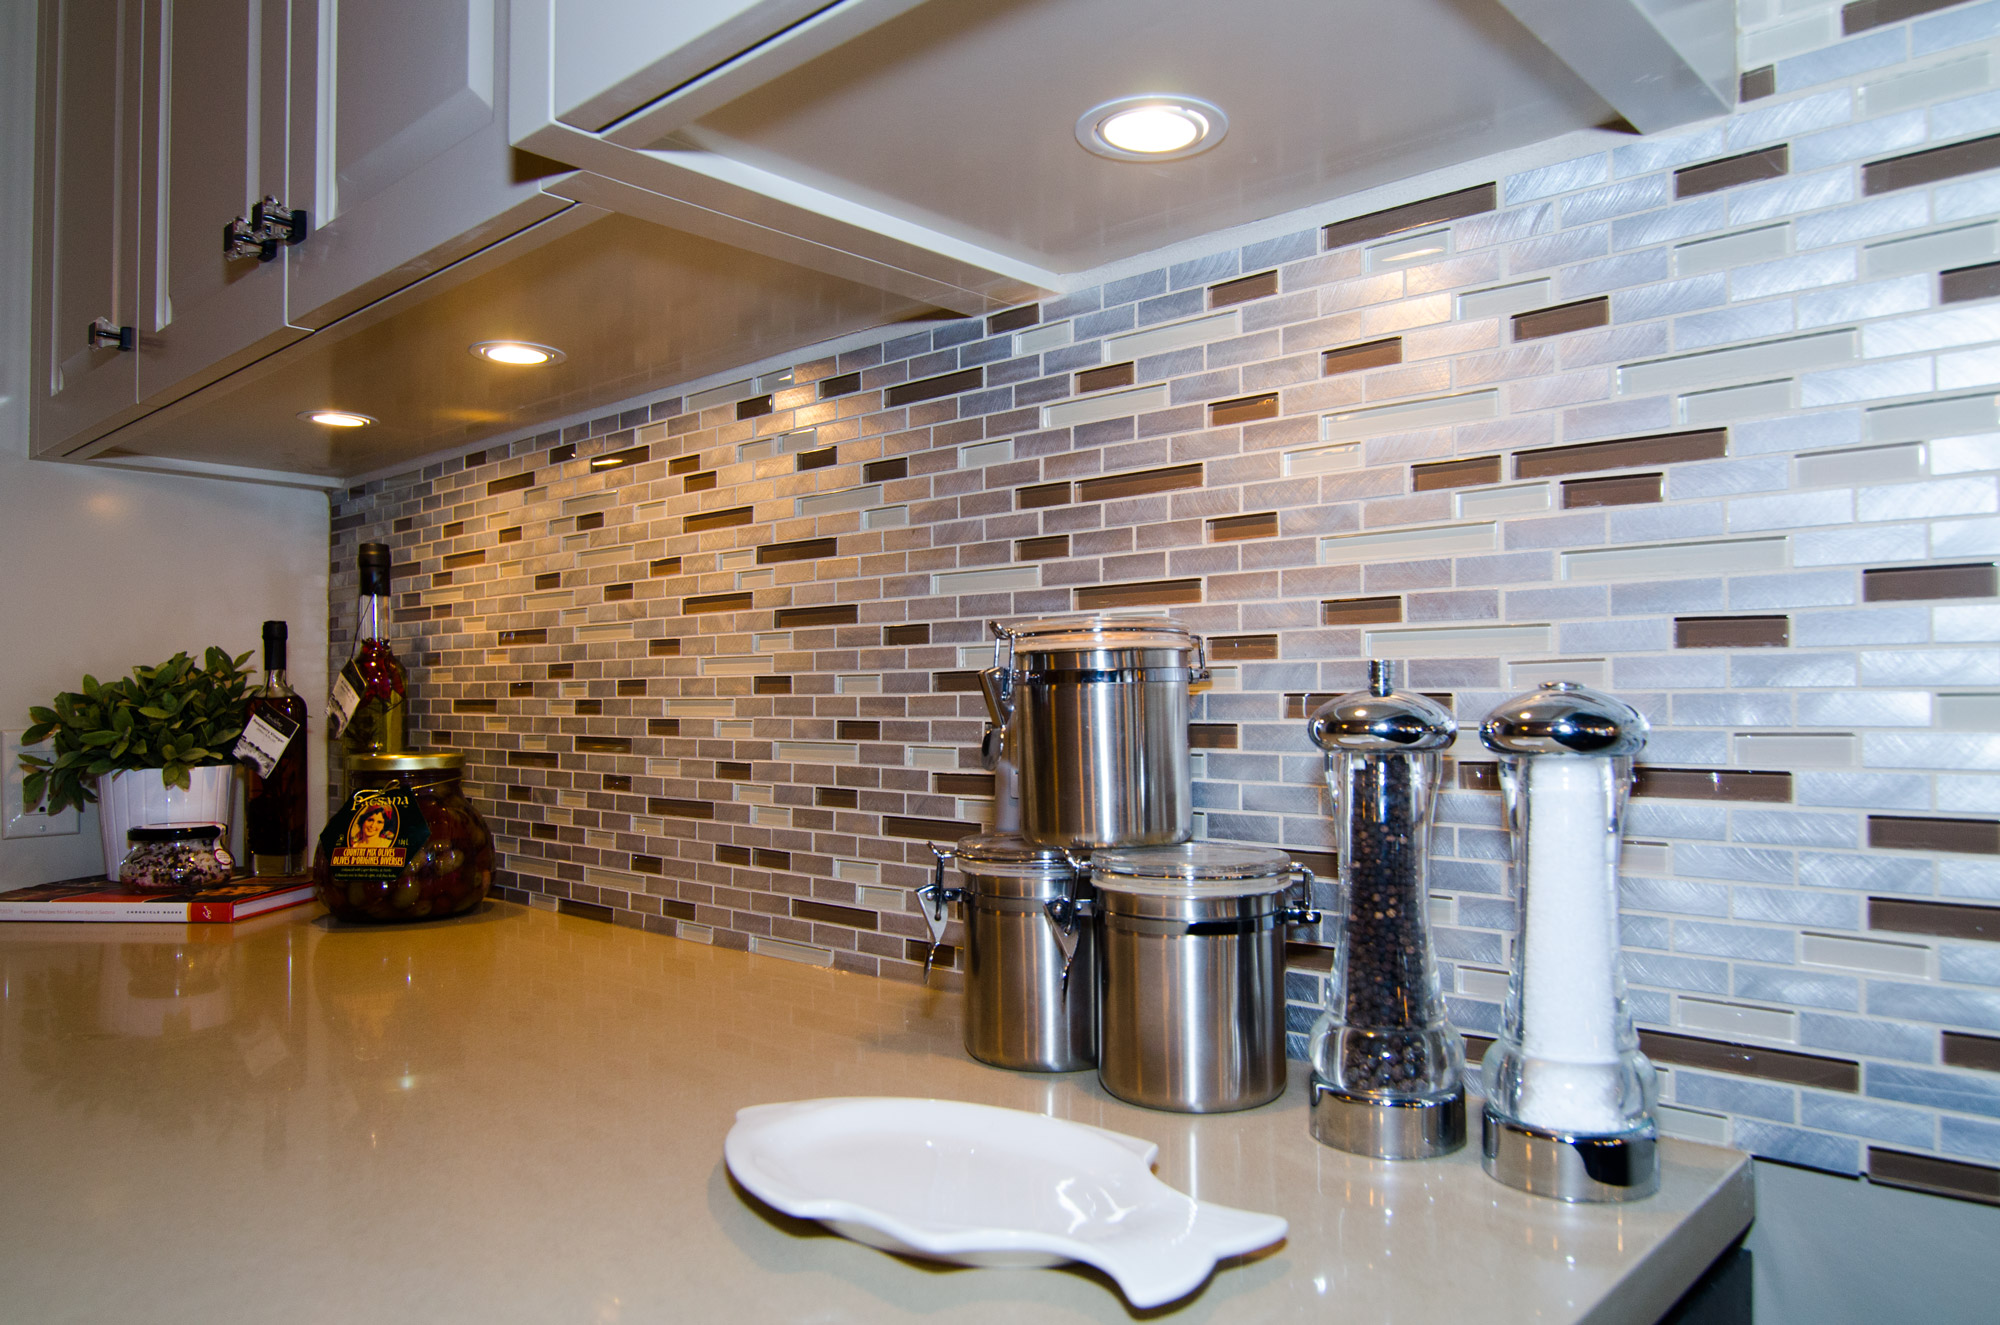   Tile makes a lasting difference.   We are full service tile installers in Calgary. Kitchen, bathroom and flooring tiles installed with the efficient, professional workmanship that you require.   Contact Us for a Quote  